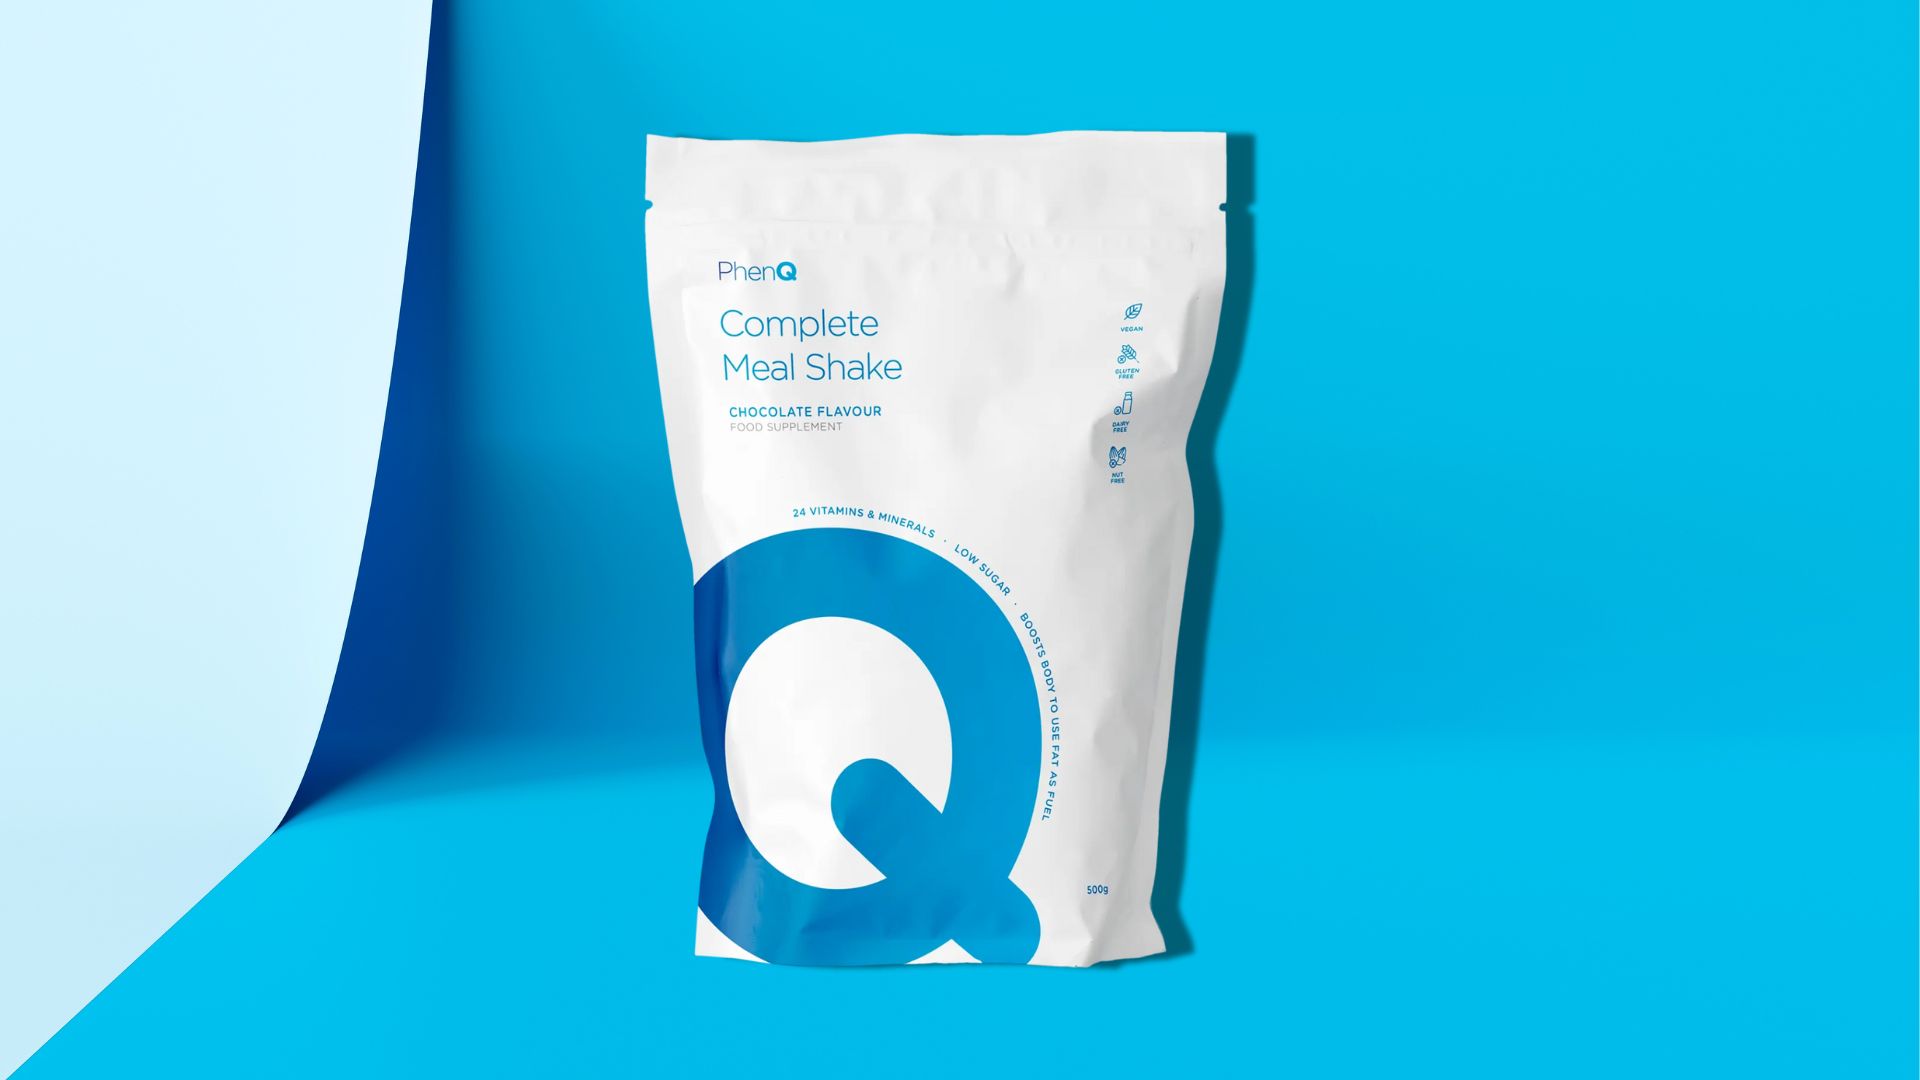 PhenQ Complete Meal Shake Reviews – Is It A Good Choice?